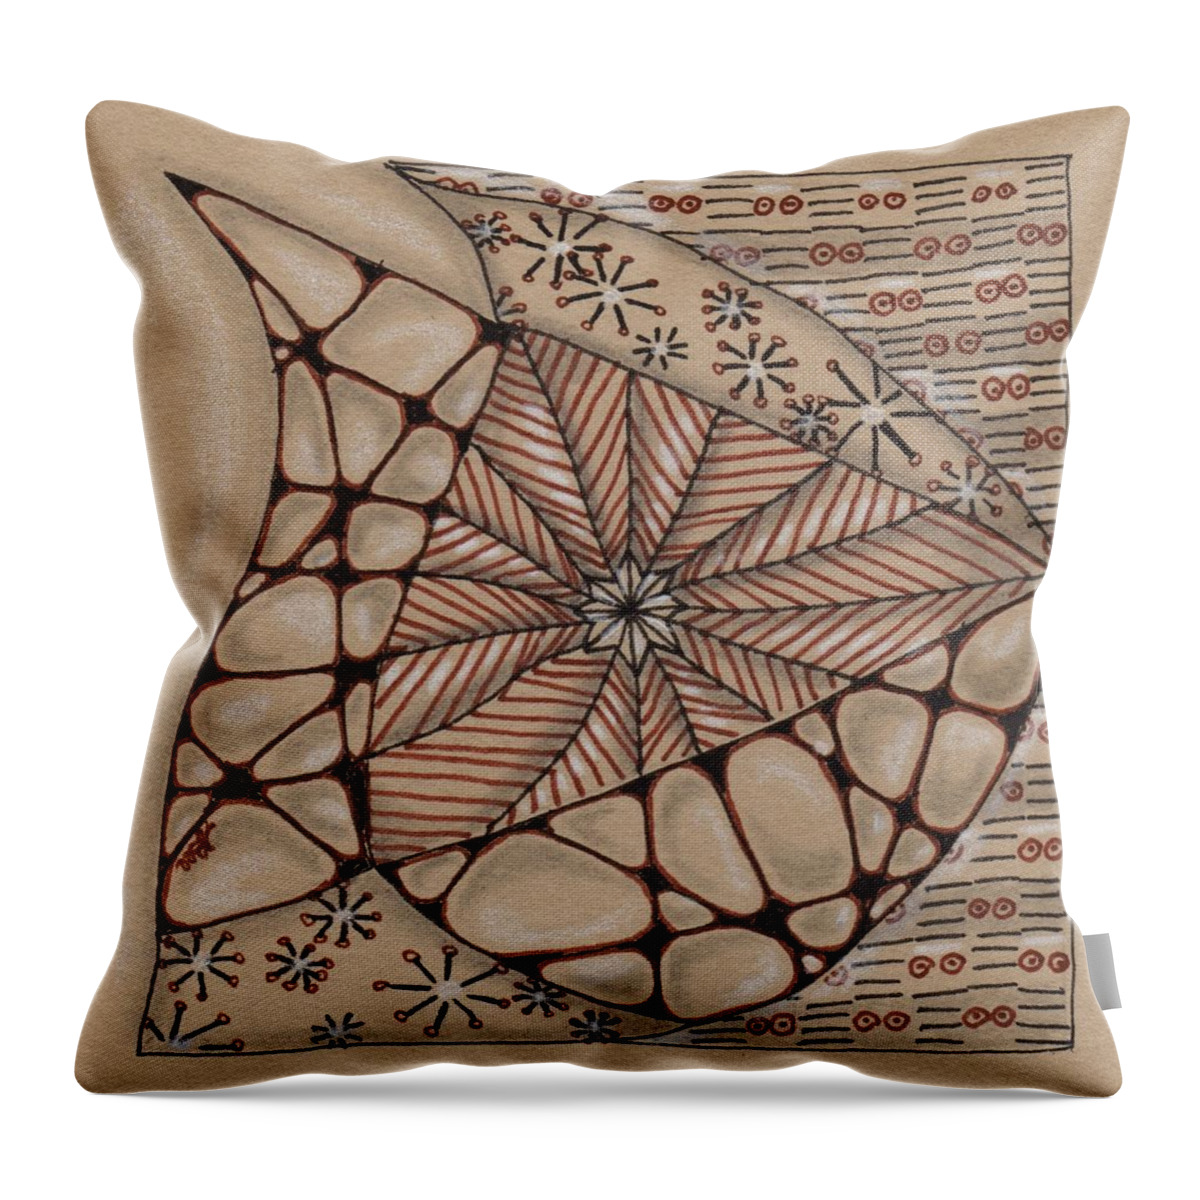 Zentangle Throw Pillow featuring the drawing Fish on a Mission by Jan Steinle